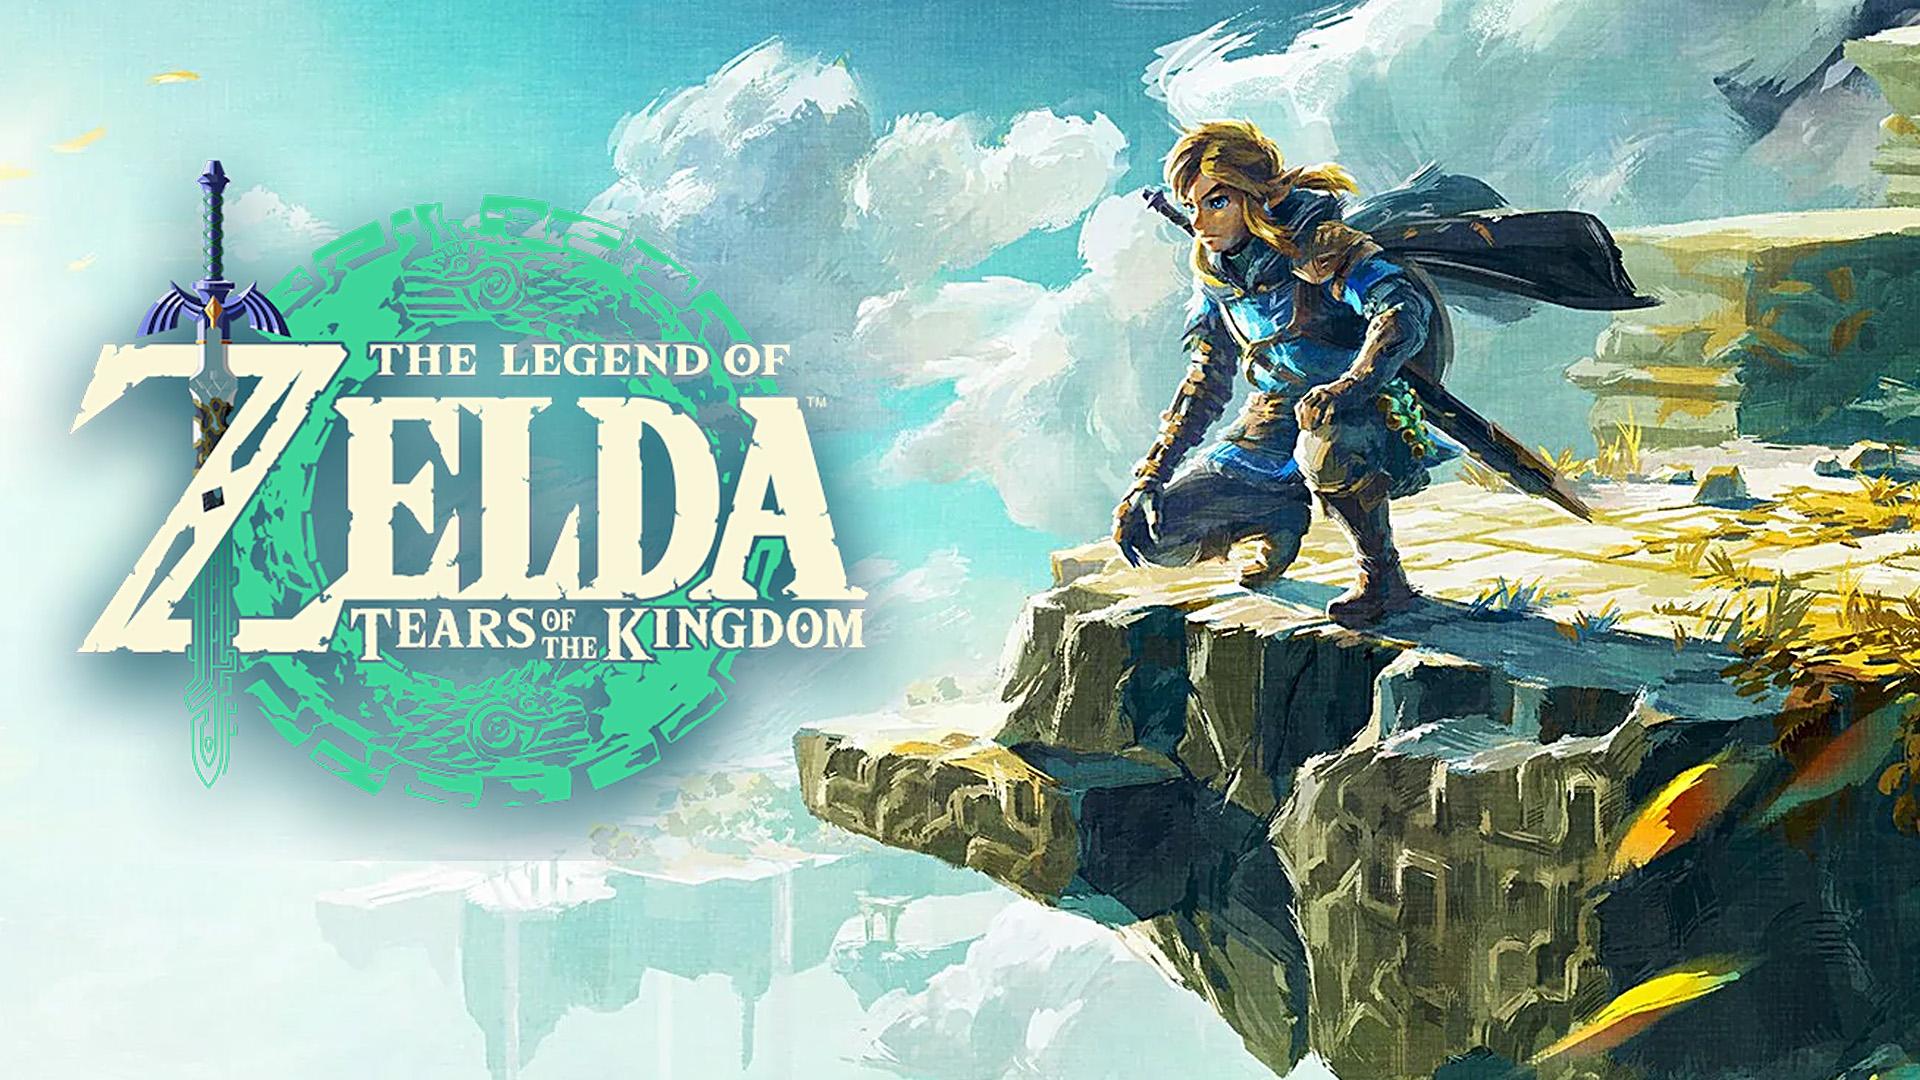 Zelda: Tears of the Kingdom sells over 18 million copies in just two months  - Dexerto